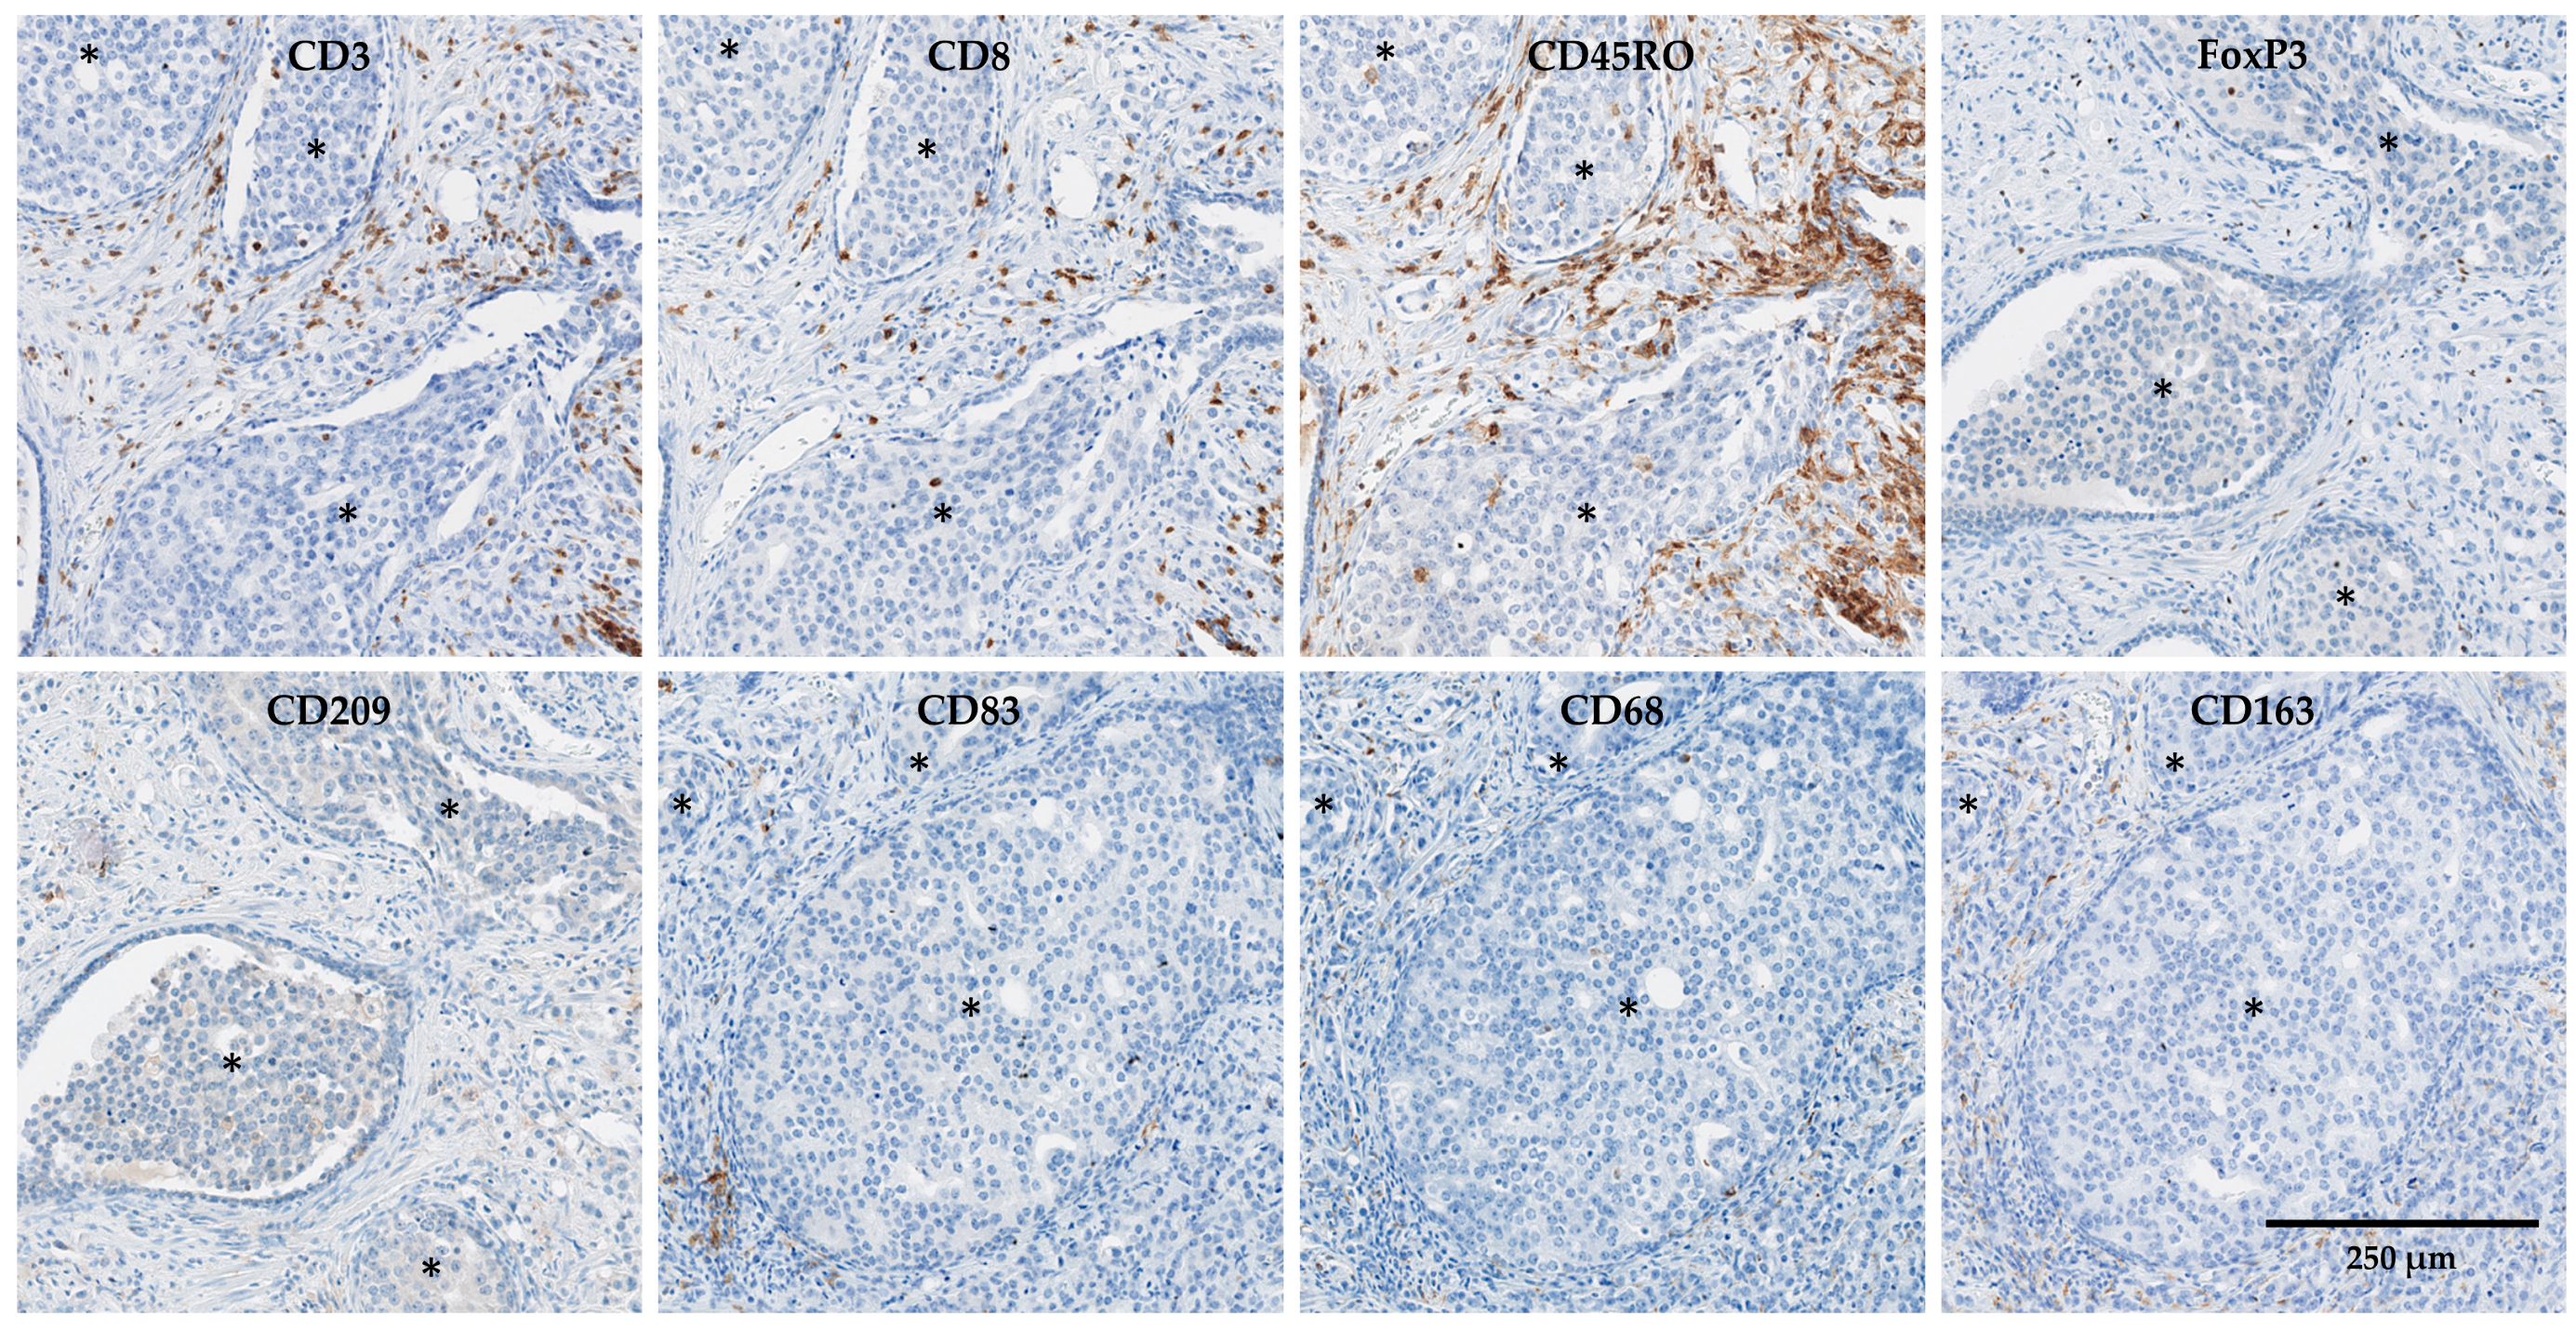 Macrophage cell counts (cells per mm2) in biopsy and tumour resection